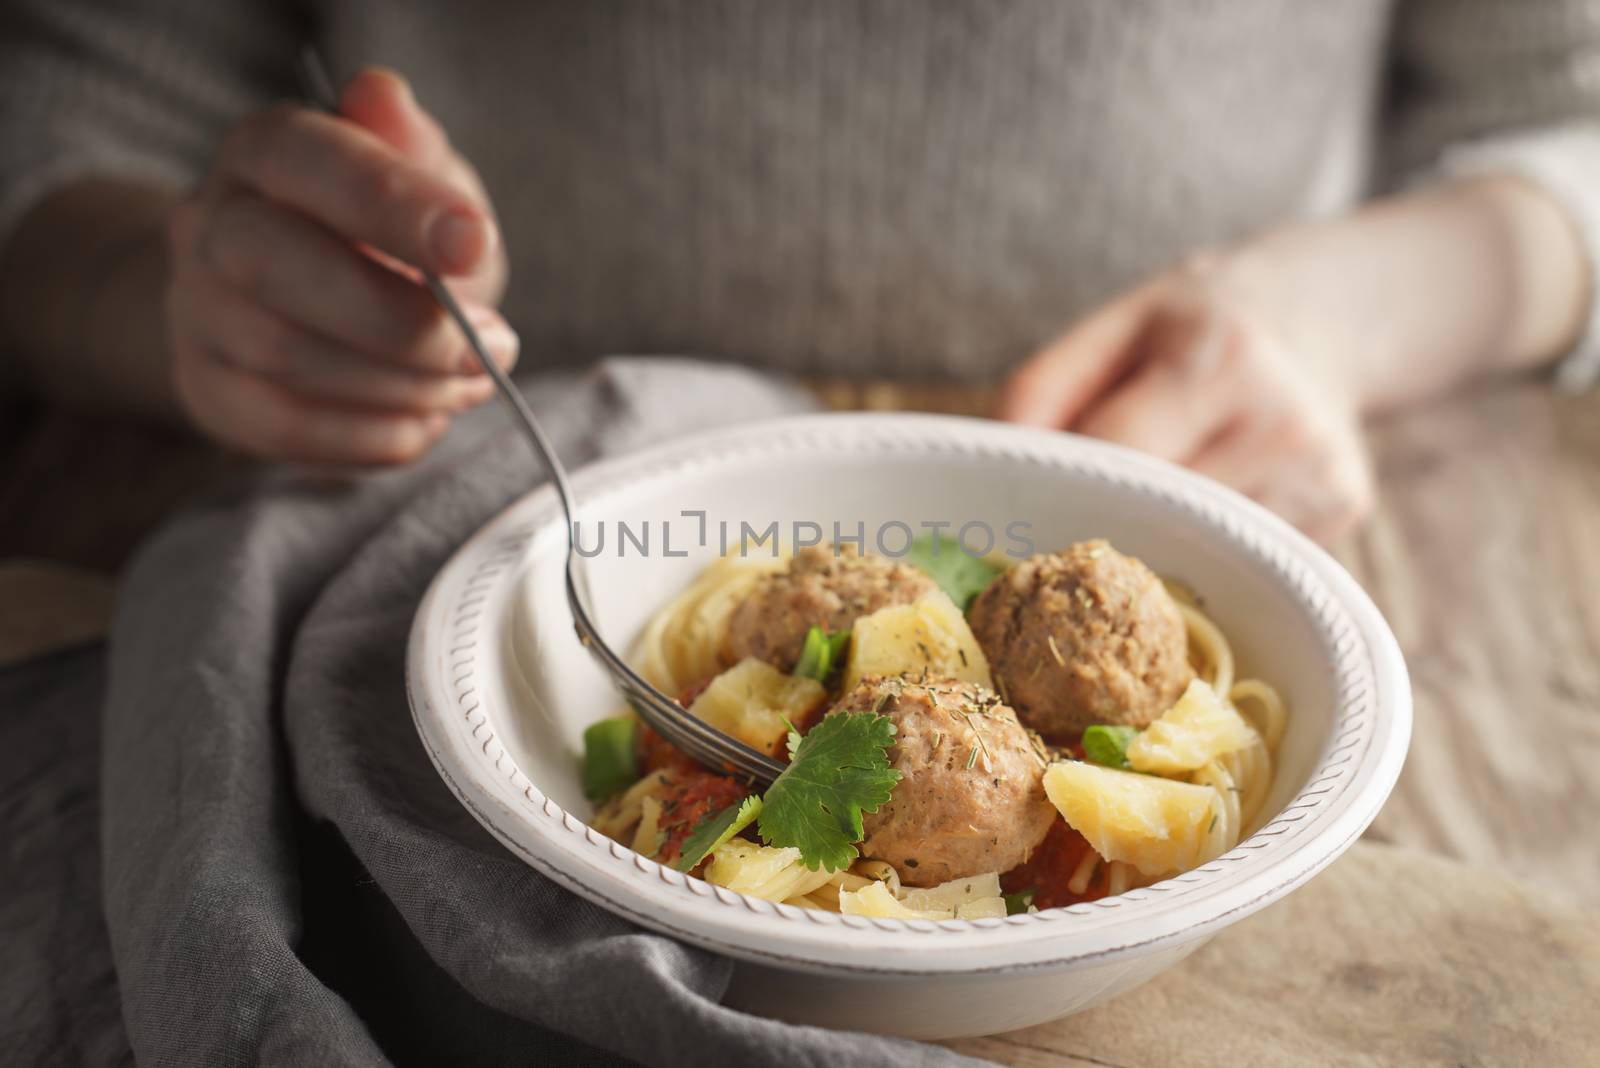 Woman eating spaghetti with meatballs from a bowl horizontal